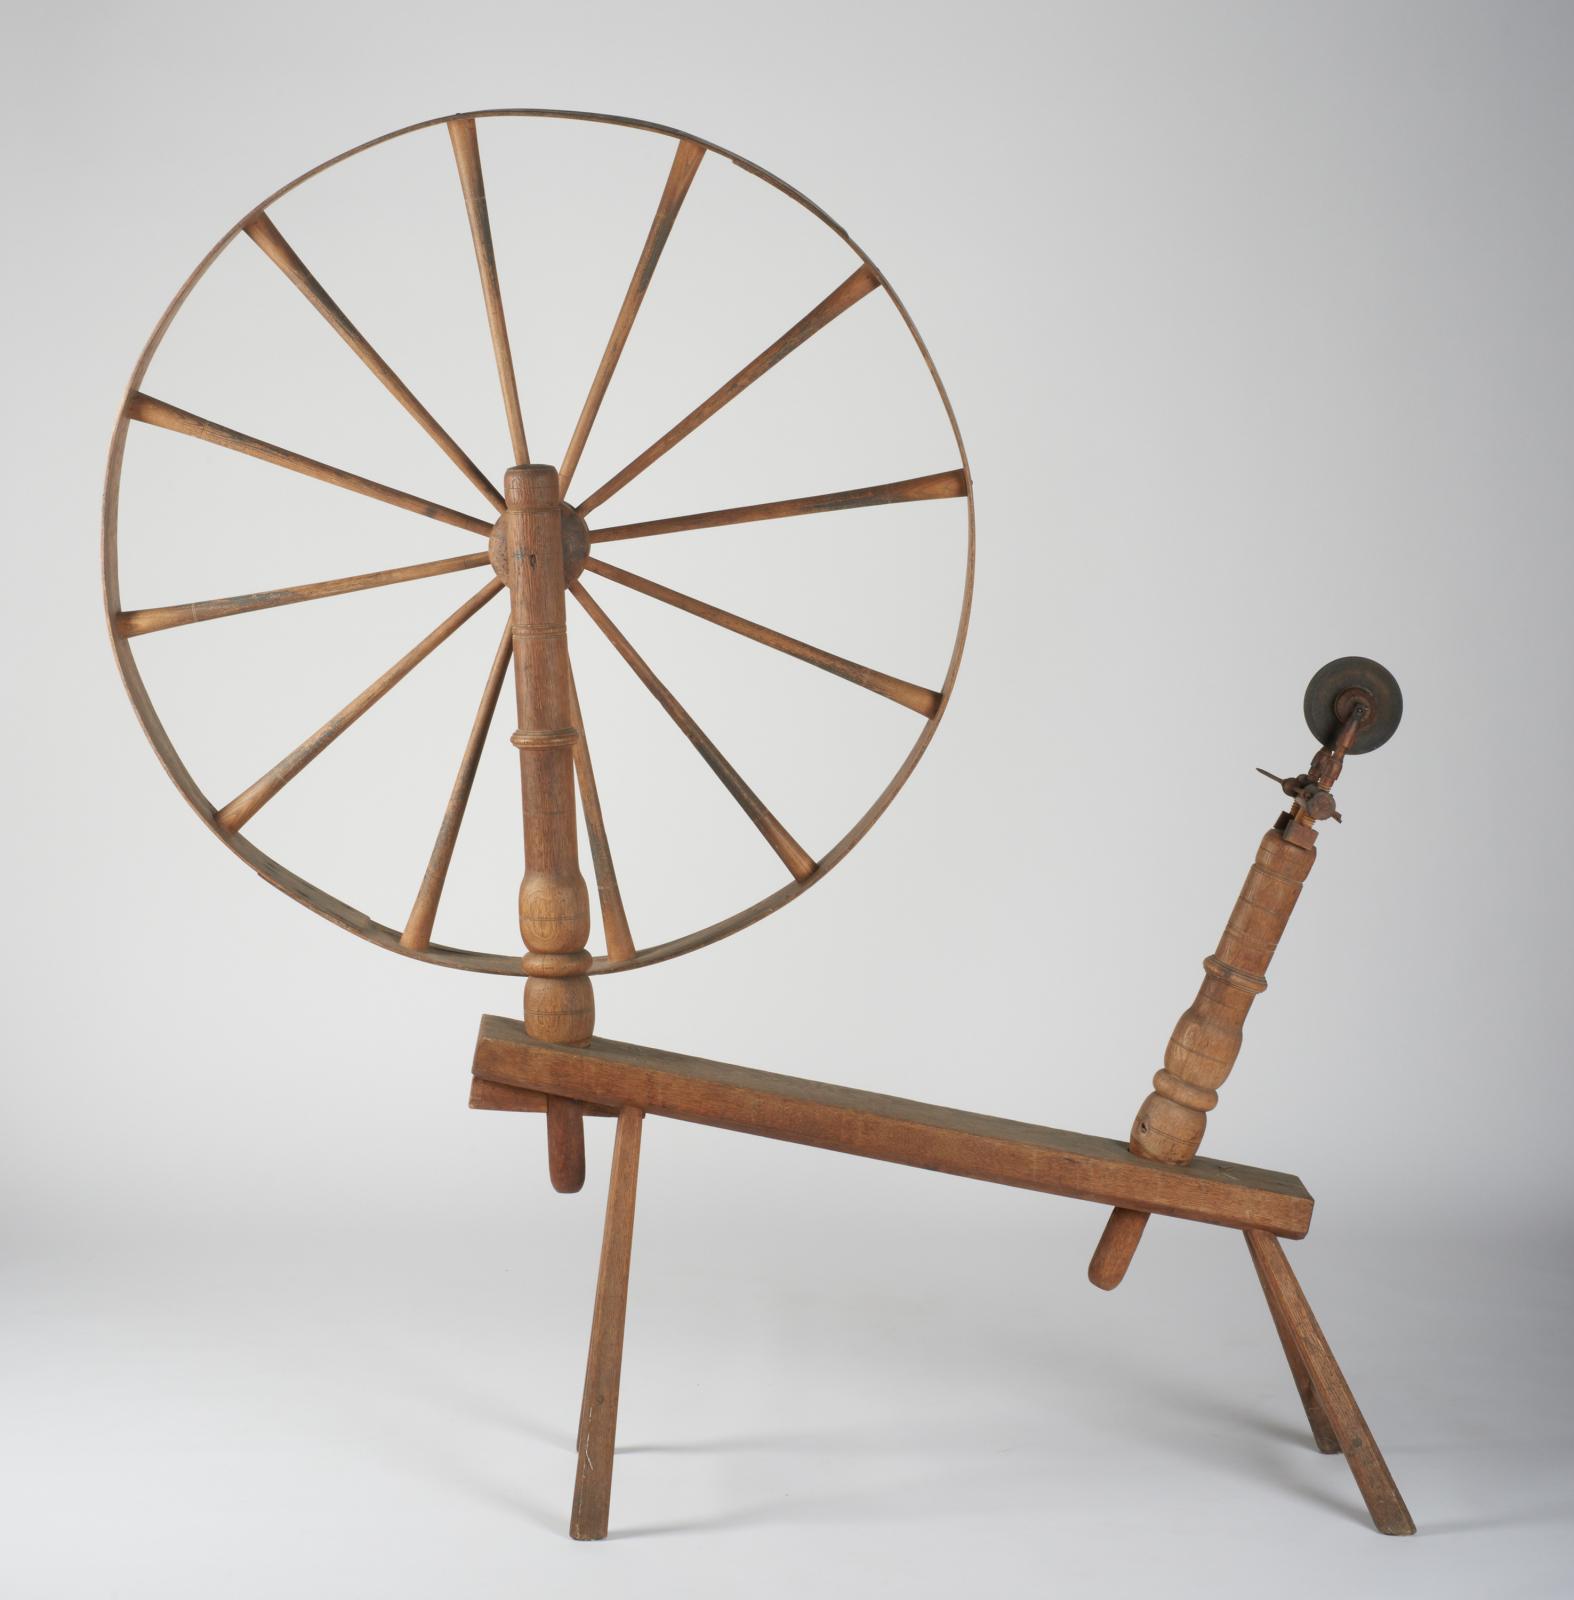 Wooden spinning wheel: large wheel with spokes attached to one end of a simple bench-like structure with a pulley device attached to the other end.  